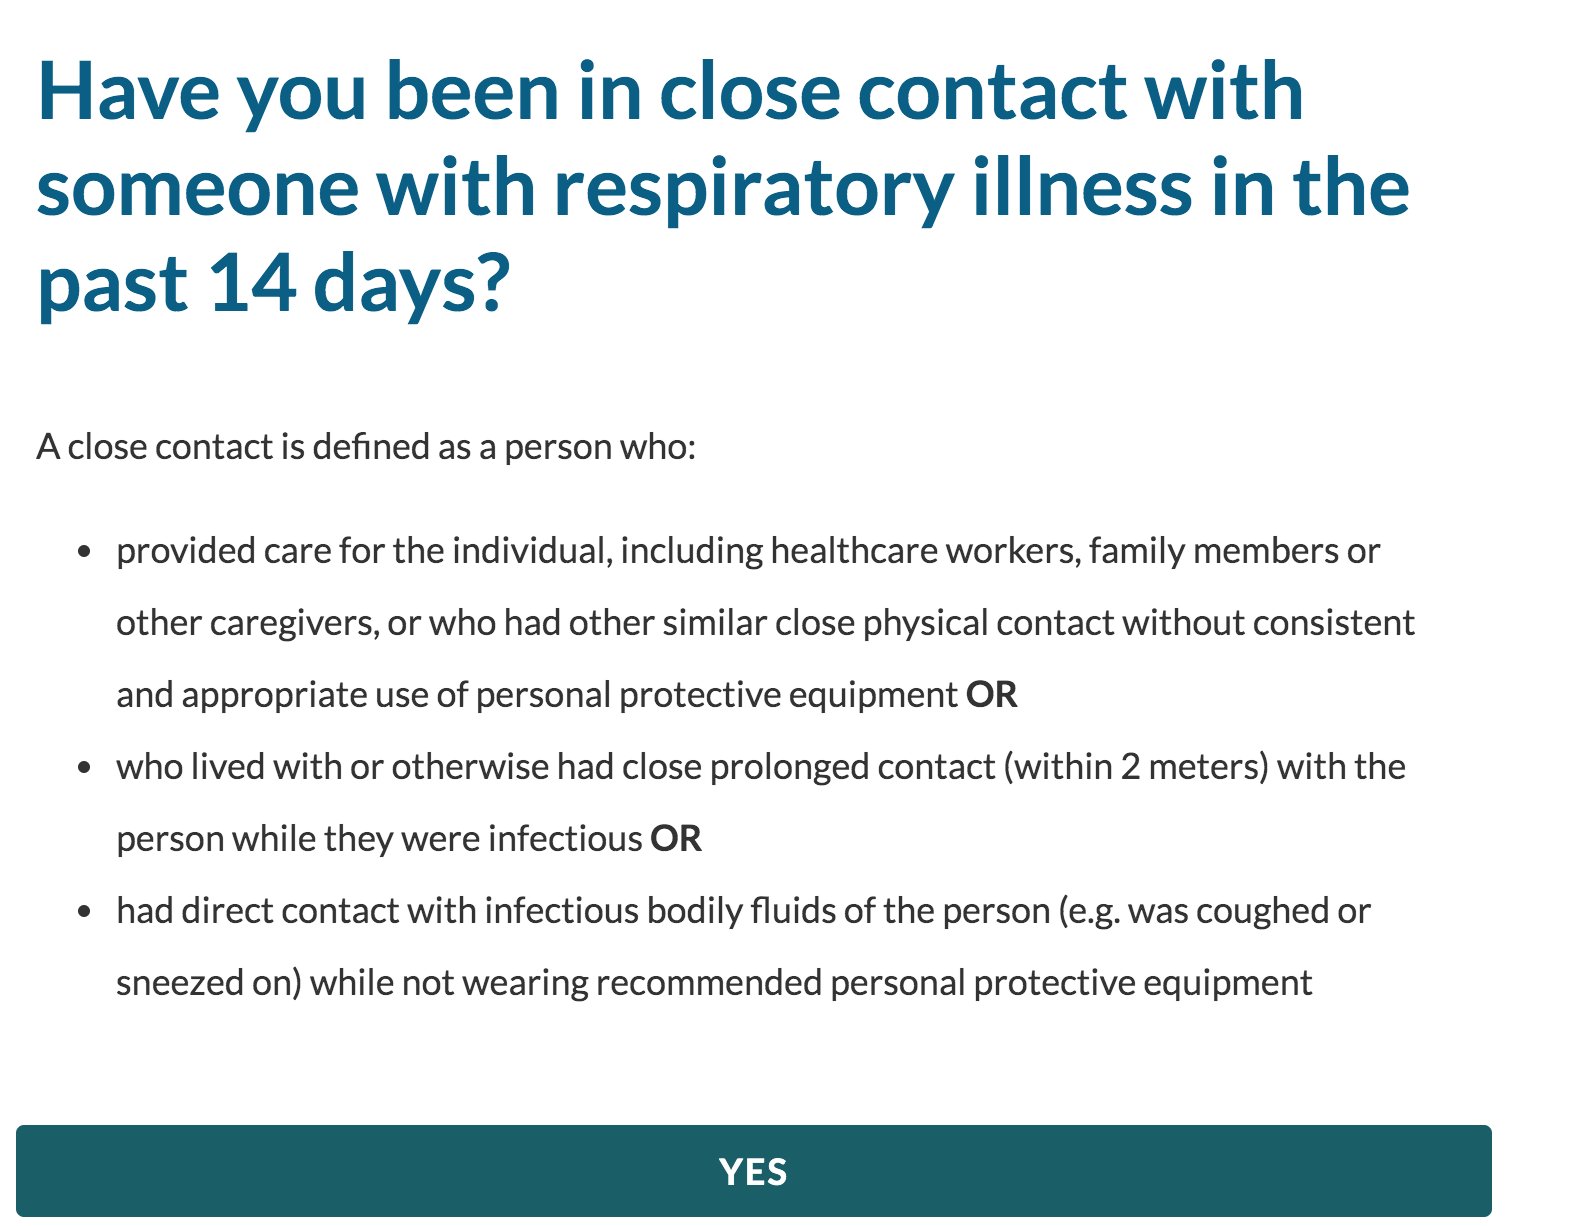 Jason Markusoff On Twitter Alberta Health Services New Coronavirus Self Assessment Tool Looks Pretty Great Instead Of Jamming 811 Lines Try This First Https T Co 0dxmiefd7e Https T Co Alsy7vqvds